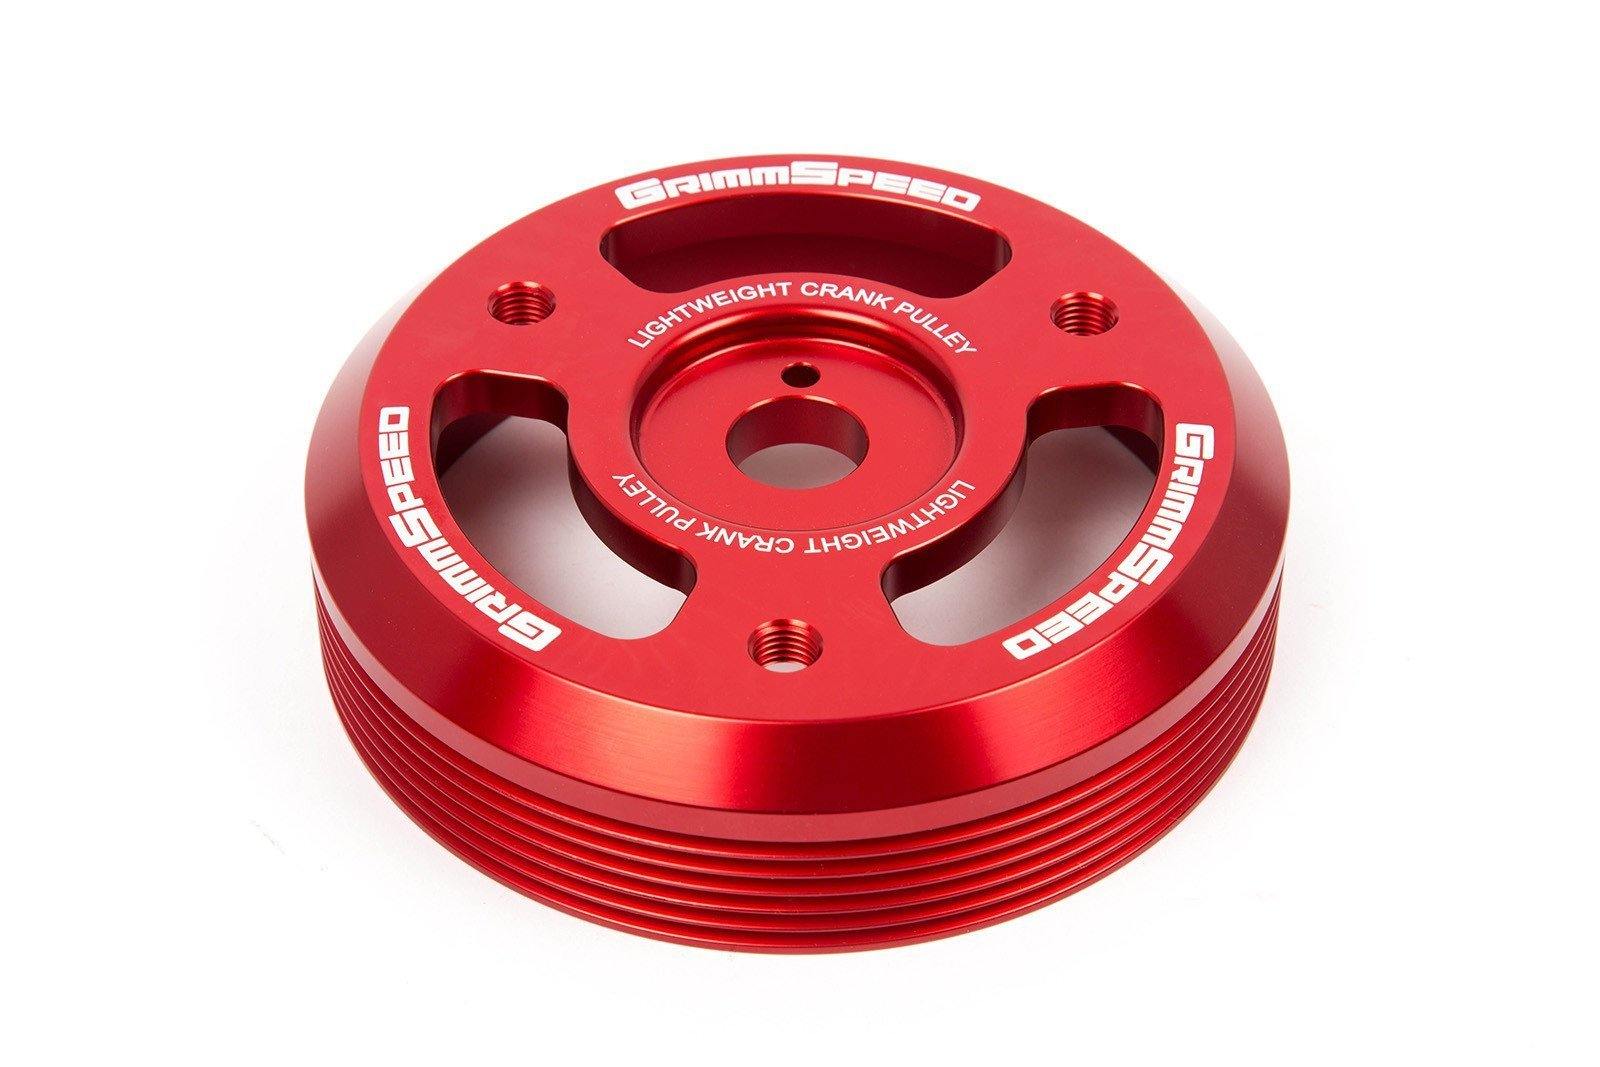 Scion/Subaru Lightweight Crank Pulley Red by Grimmspeed (095024) – 